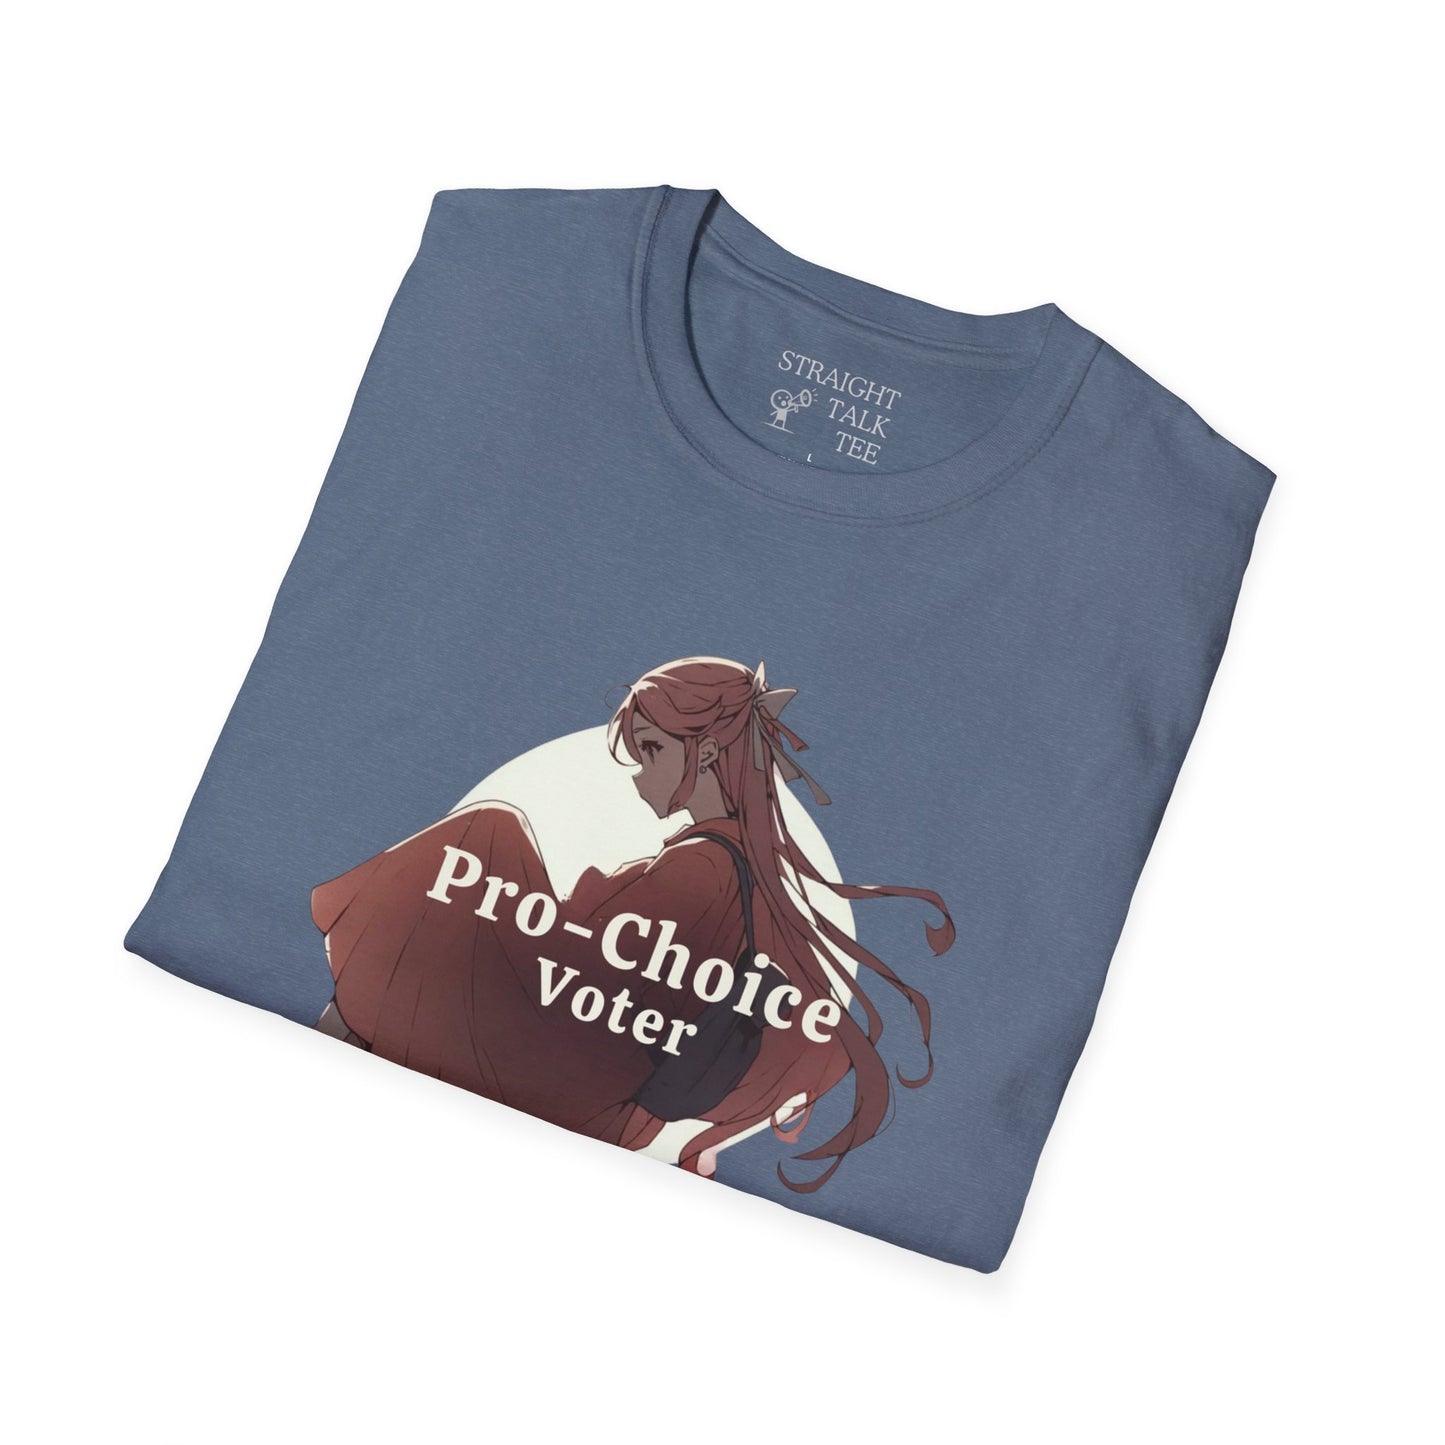 Pro-Choice Voter Anime Soft Style t-shirt |unisex| Political shirt, Inpire, go out and Vote!